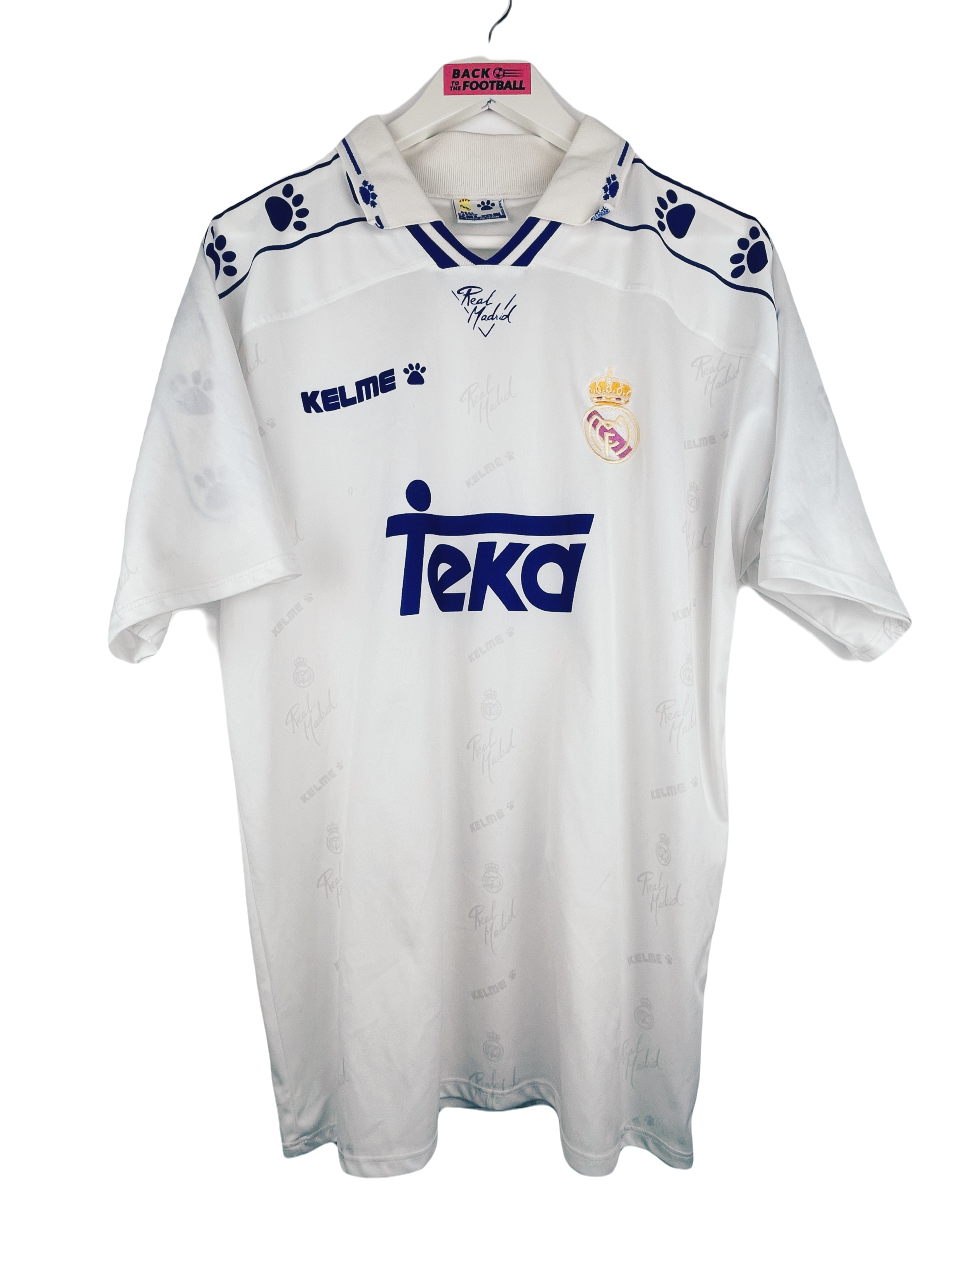 Maillots vintage Real Madrid - Back To The Football